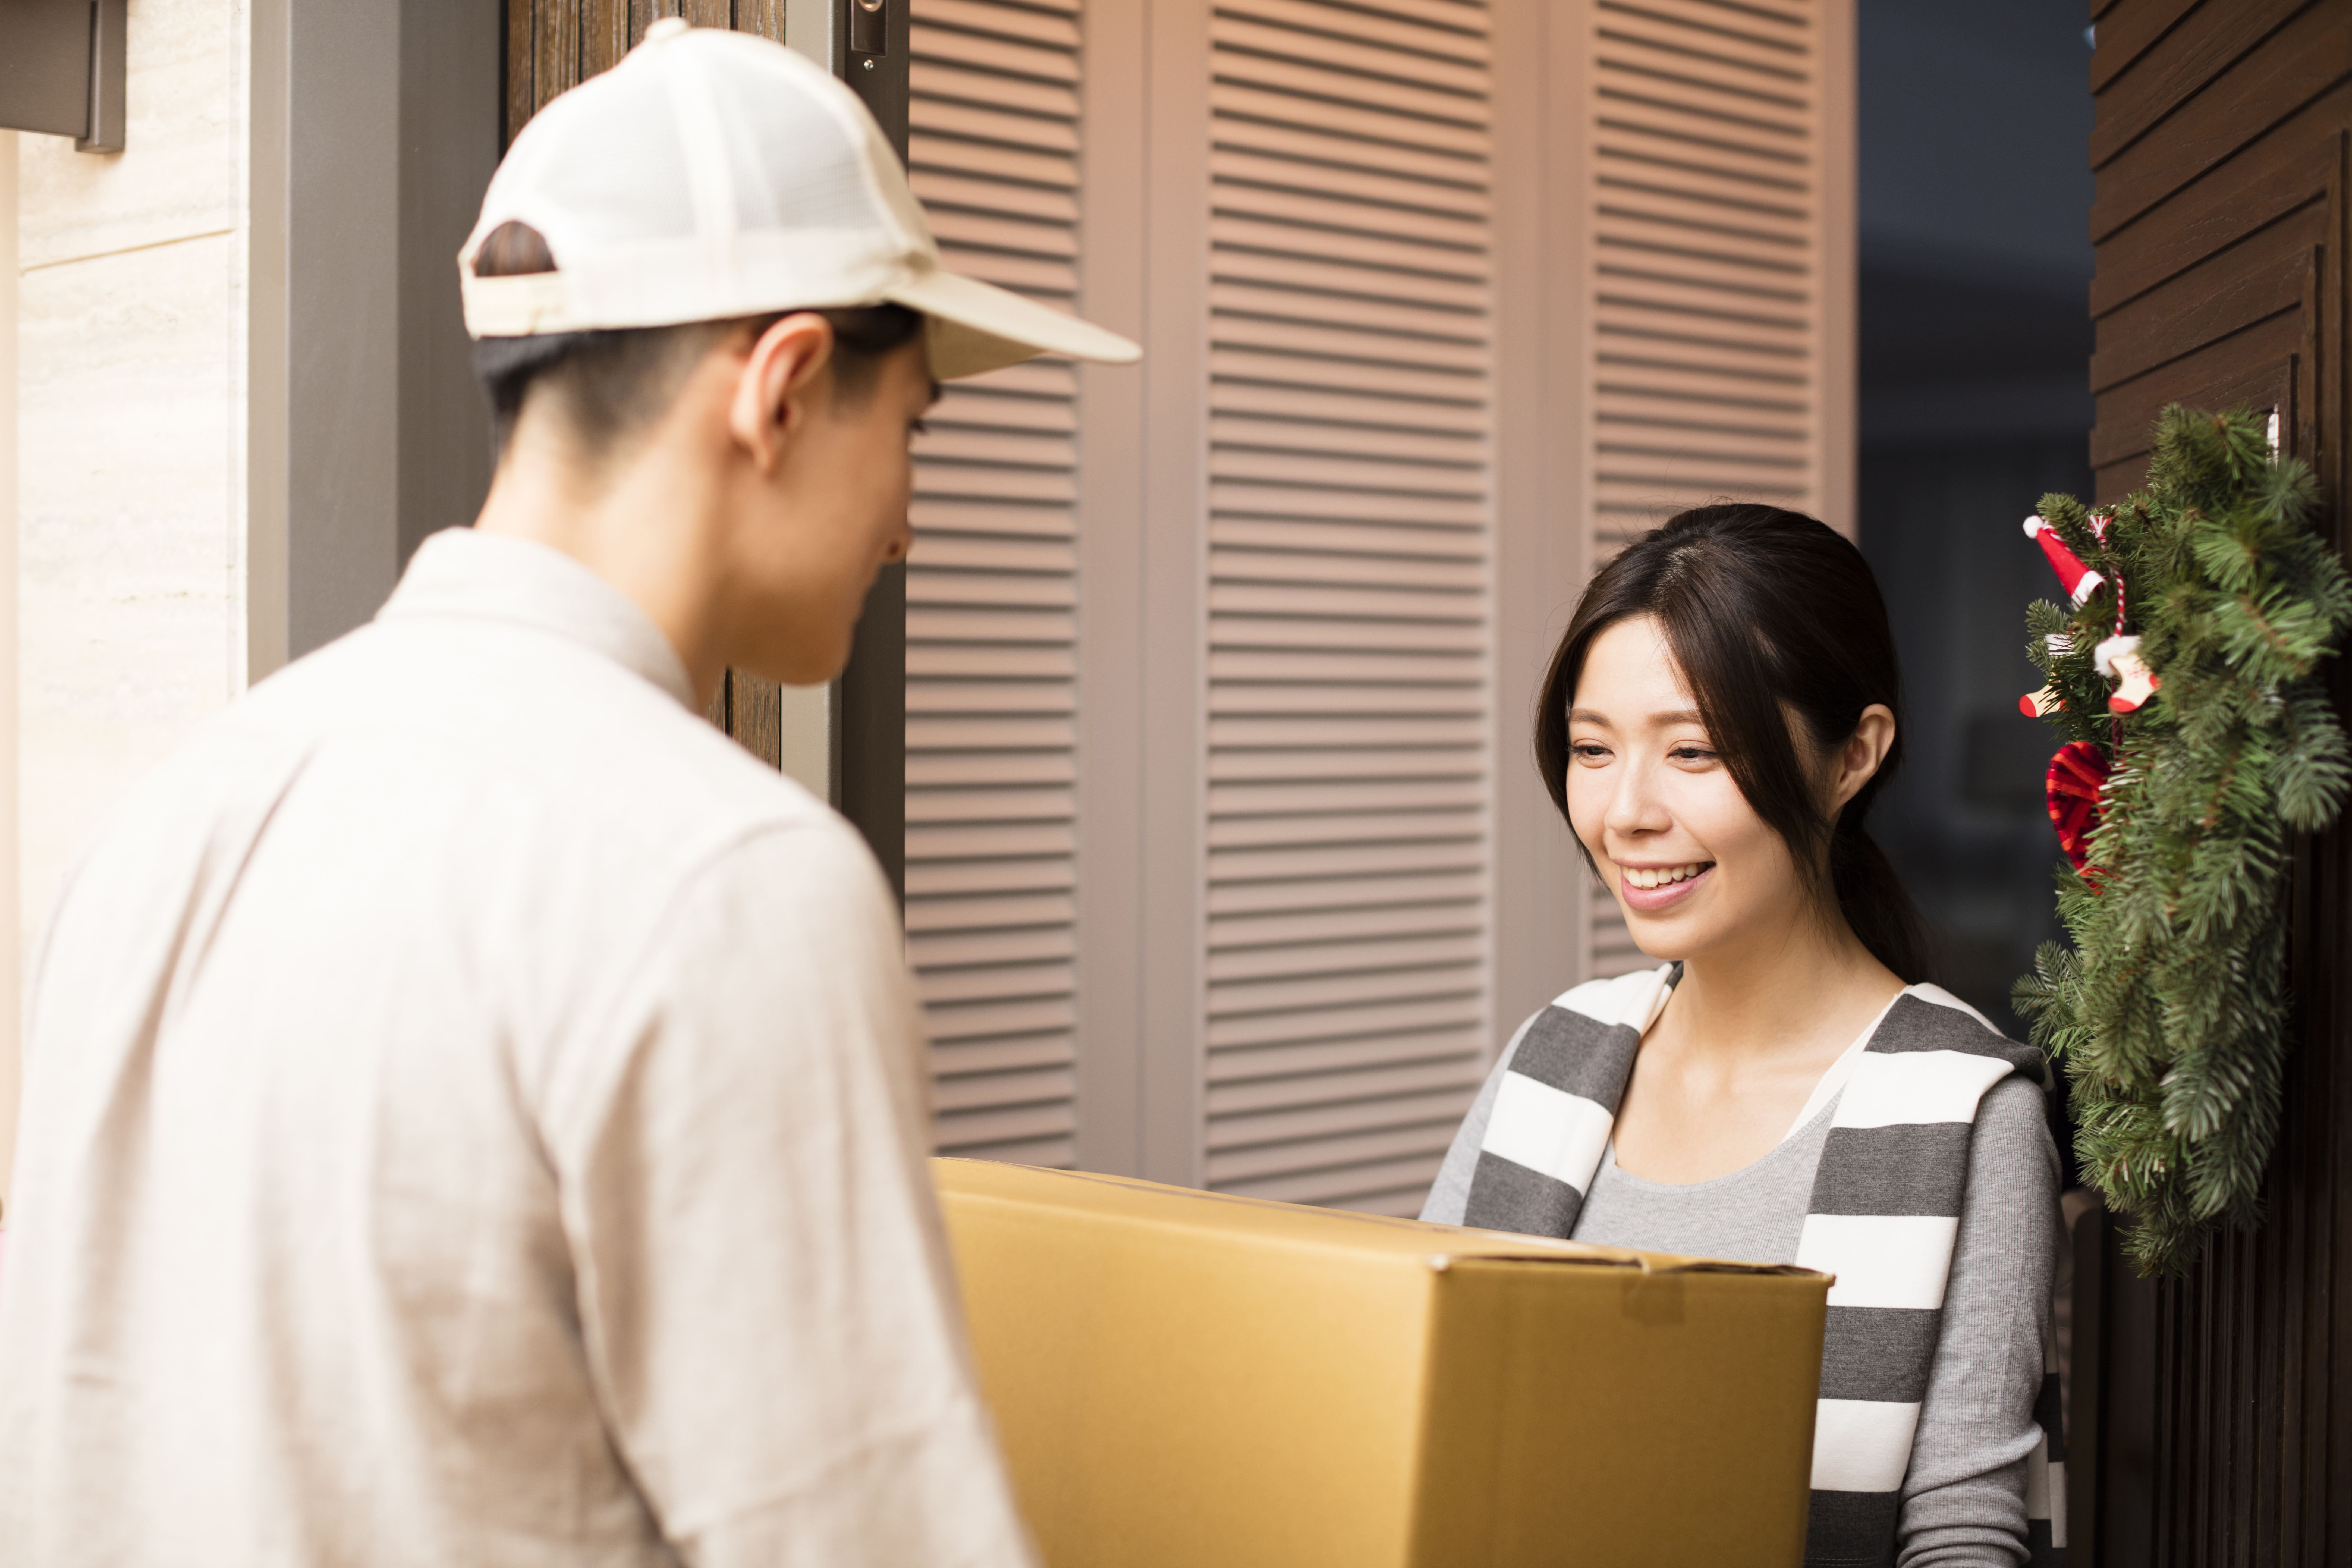 8 Ways to Make Life Easier for Holiday Delivery Drivers